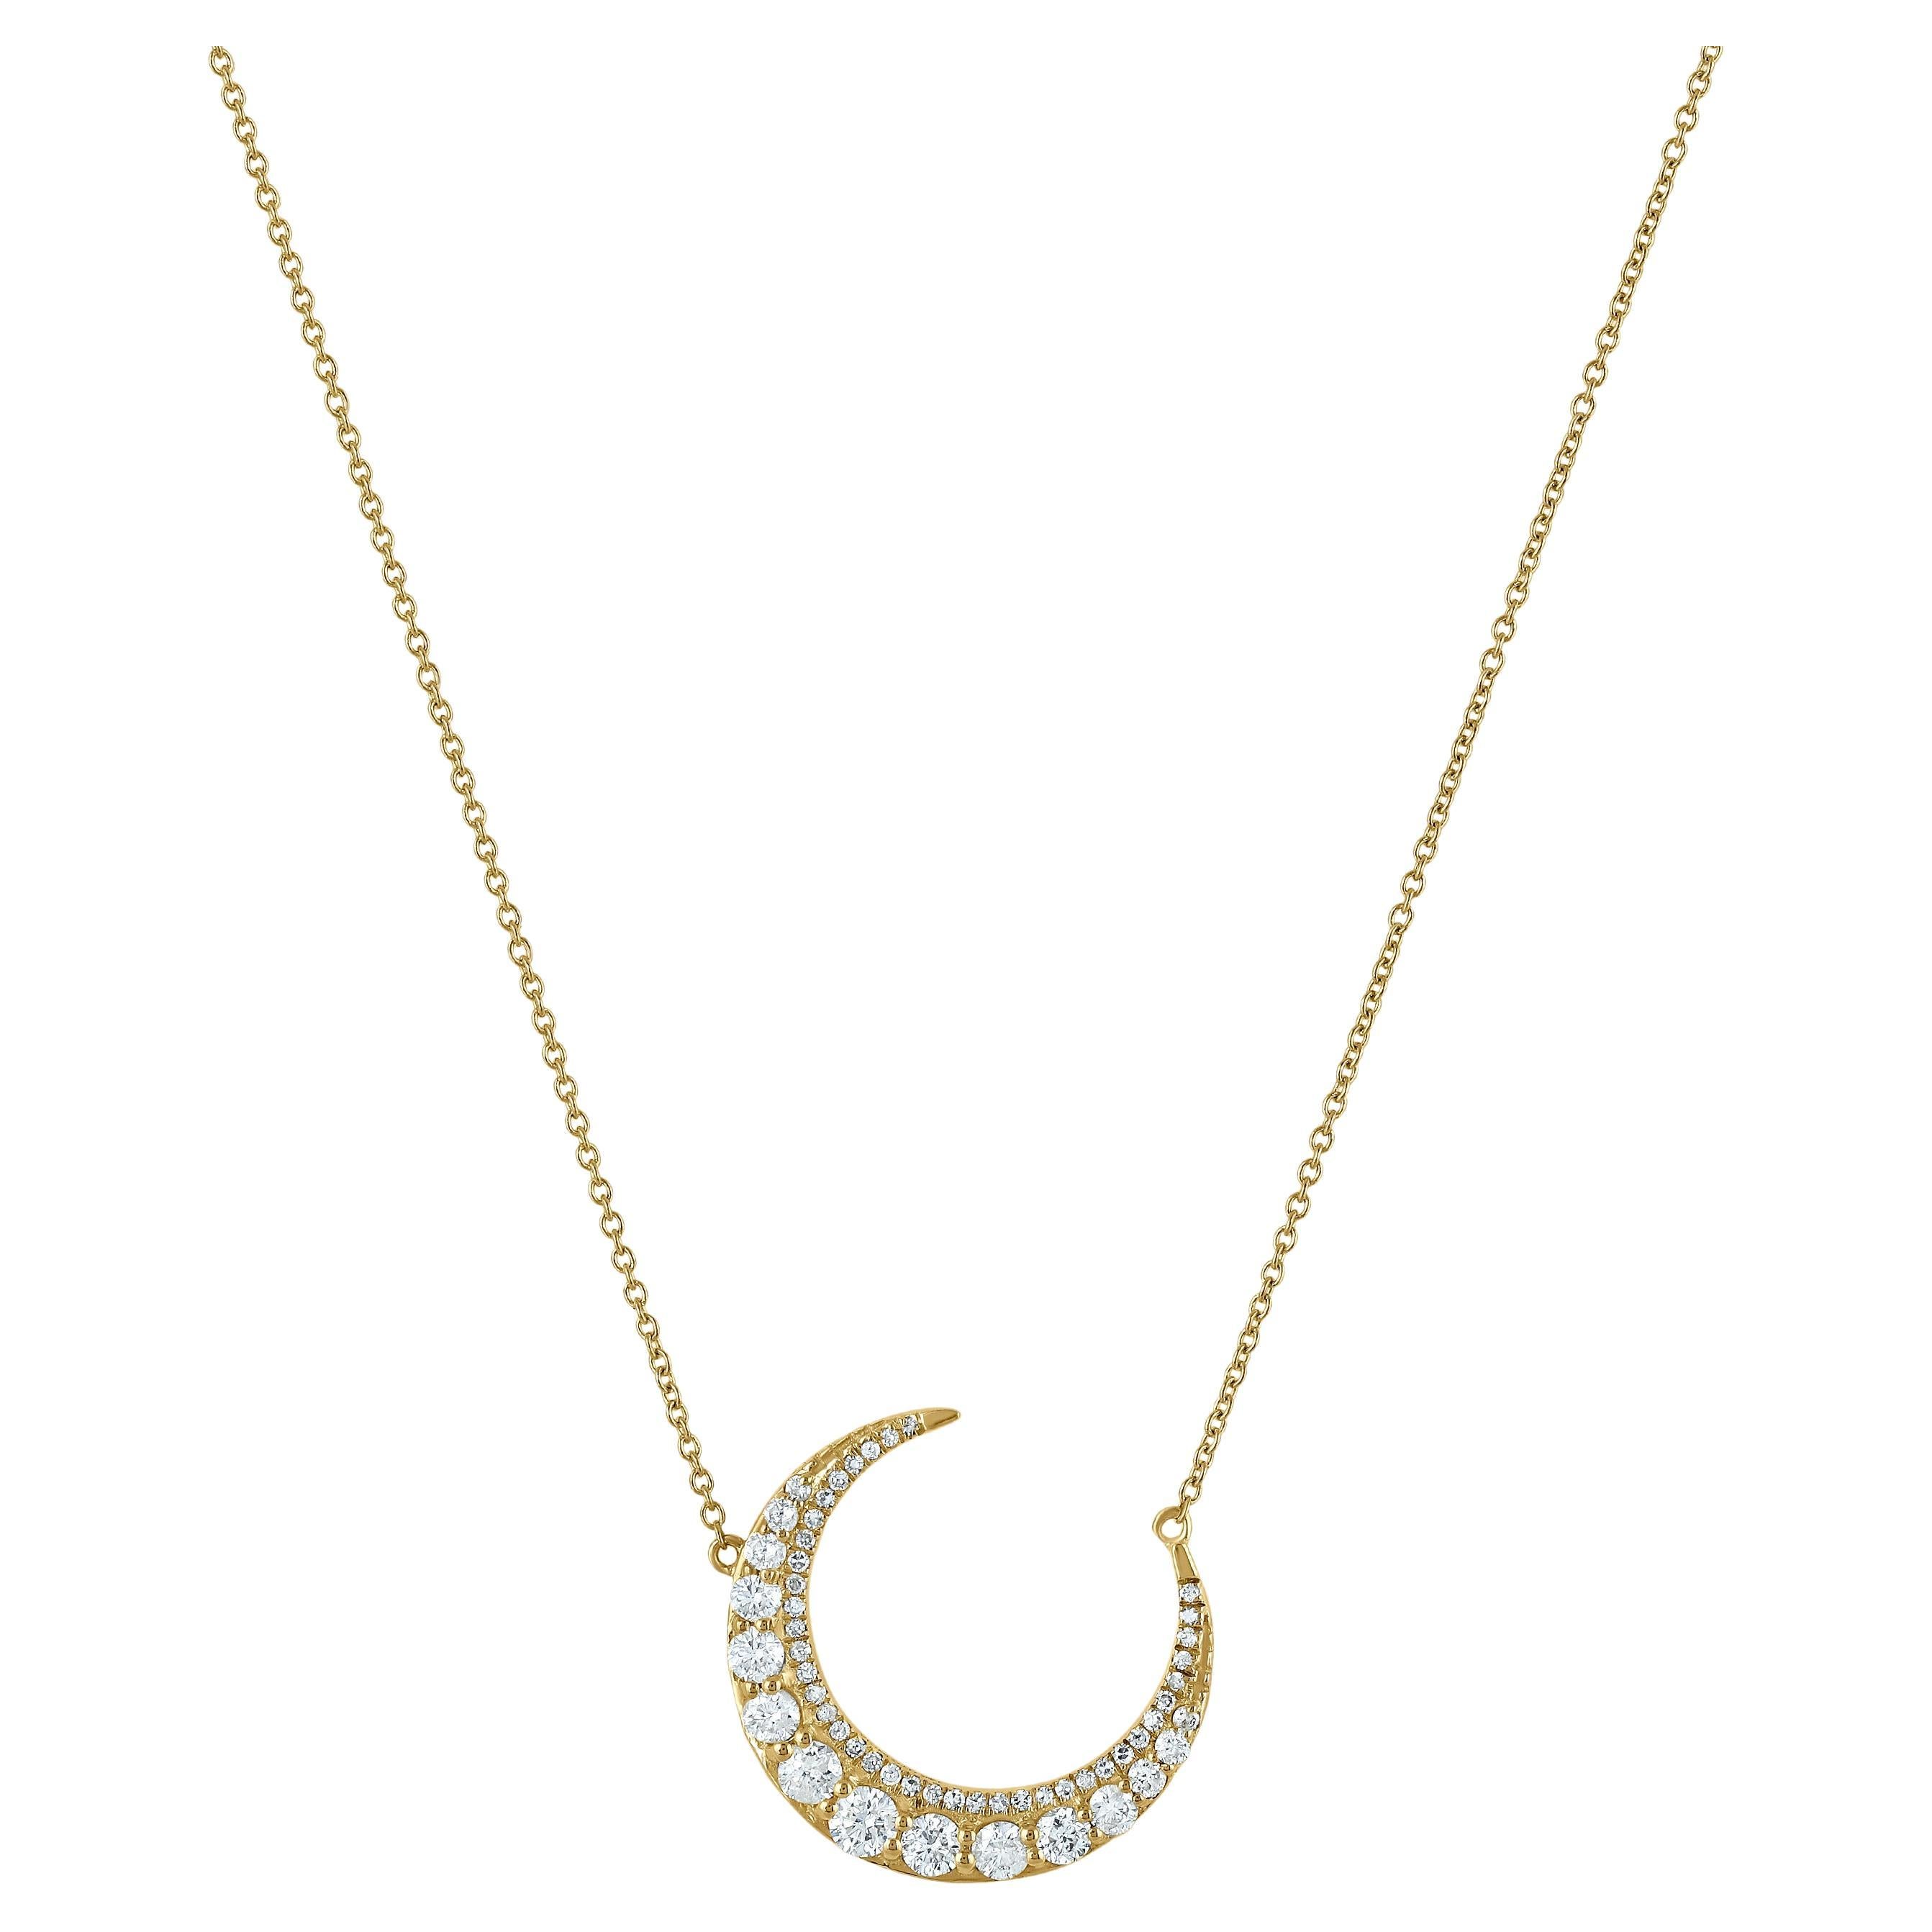 Luxle 5/8 Carat T.W. Diamond Crescent Moon Pendant Necklace in 14k Yellow Gold For Sale